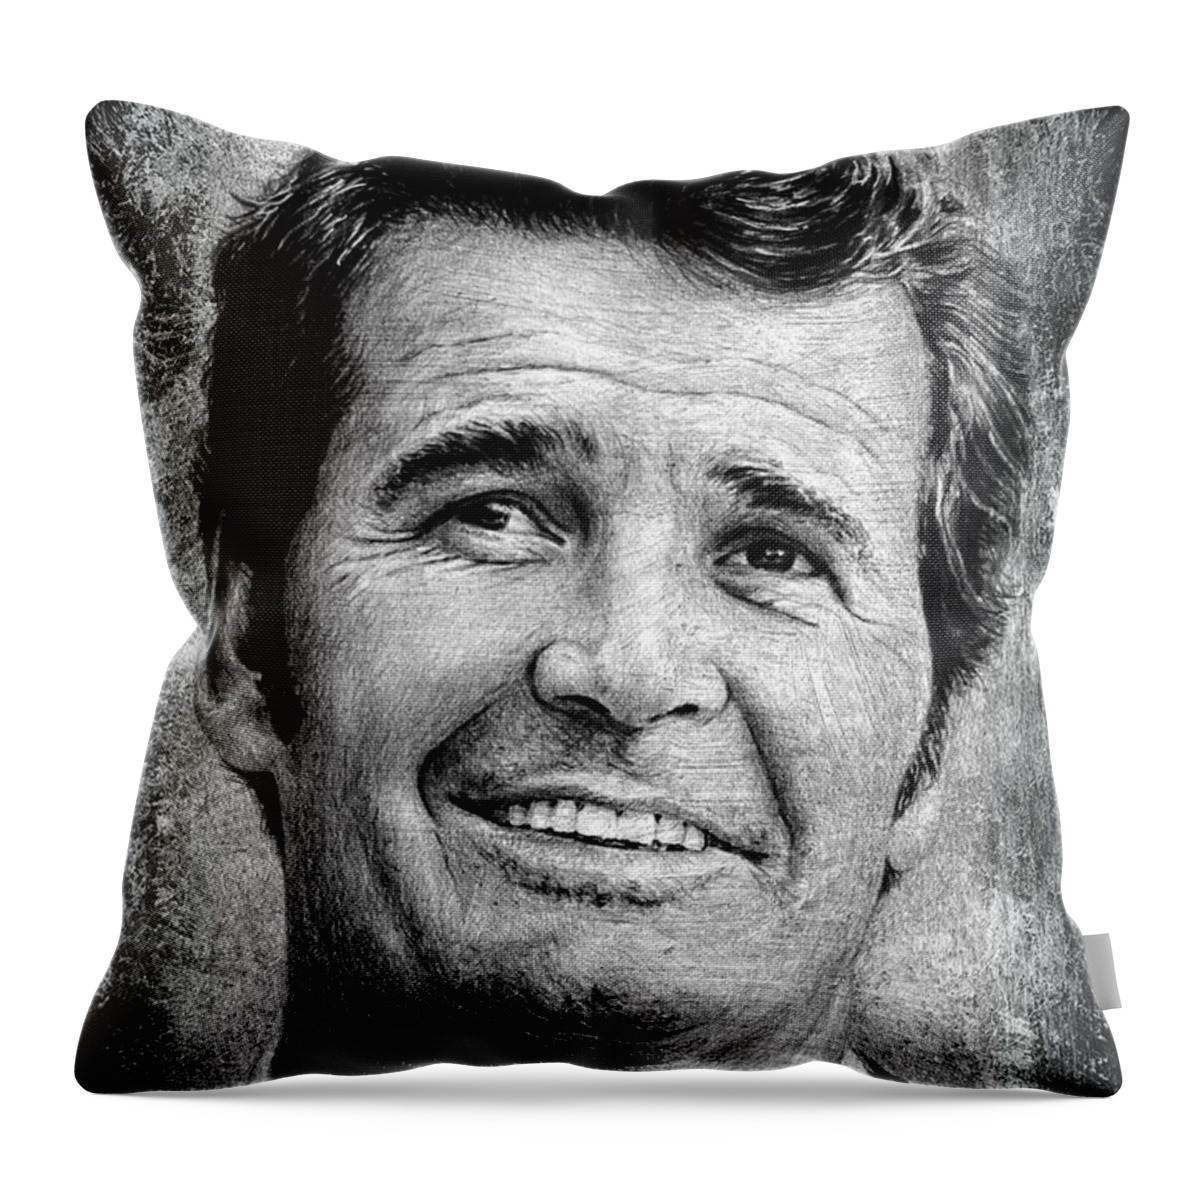 James Garner Throw Pillow featuring the drawing James Garner by Andrew Read